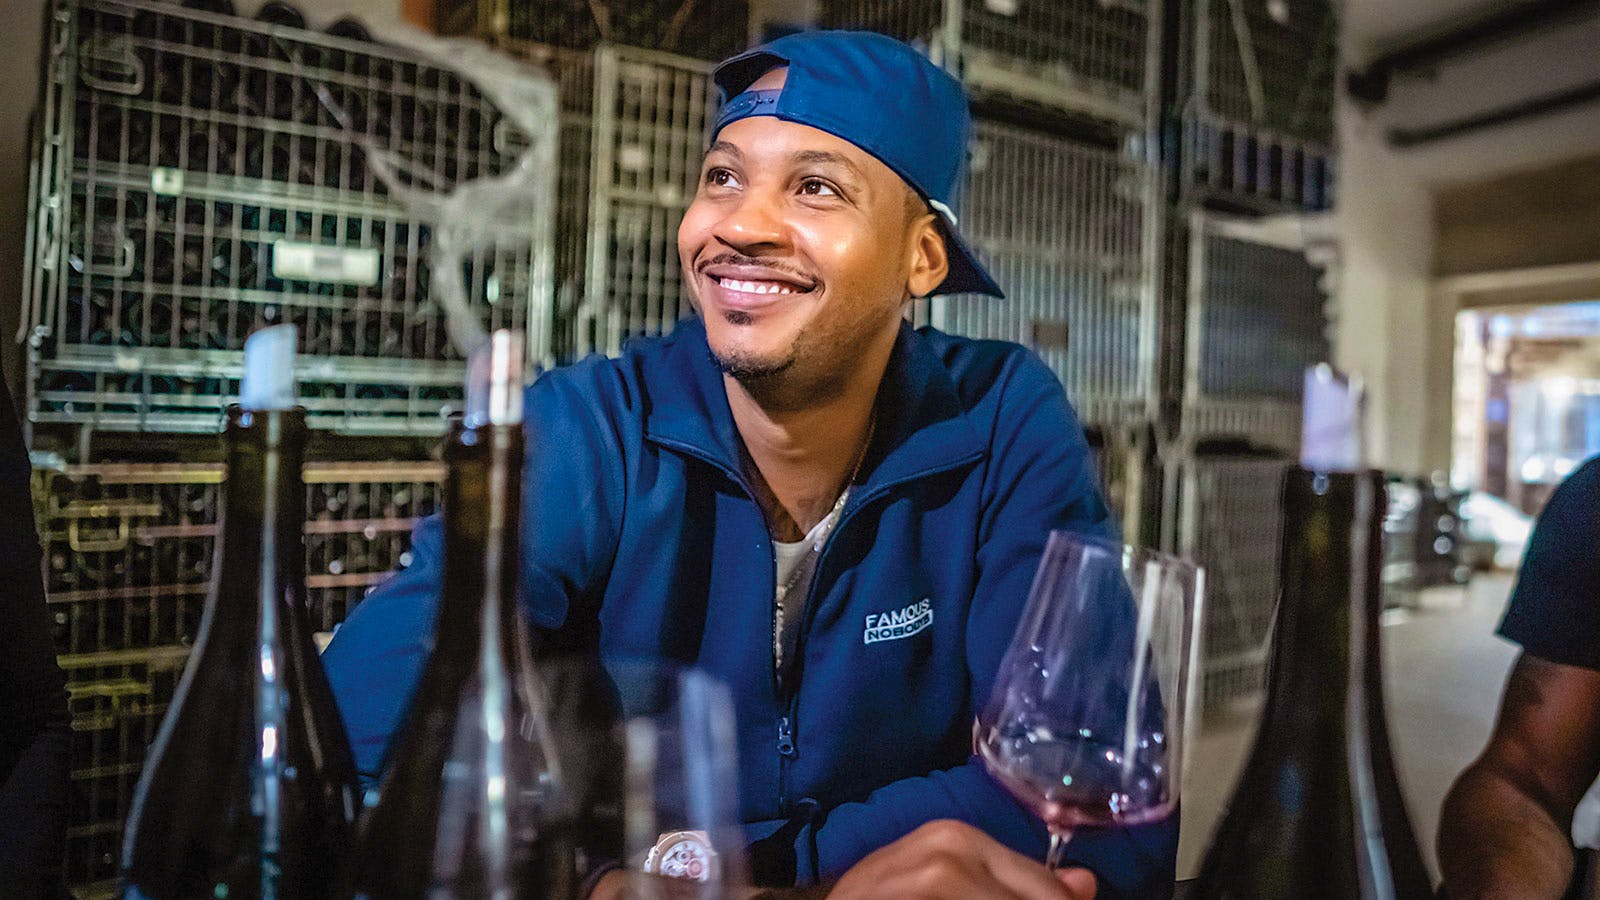 Carmelo Anthony Launches a Châteauneuf-du-Pape with Stéphane Usseglio